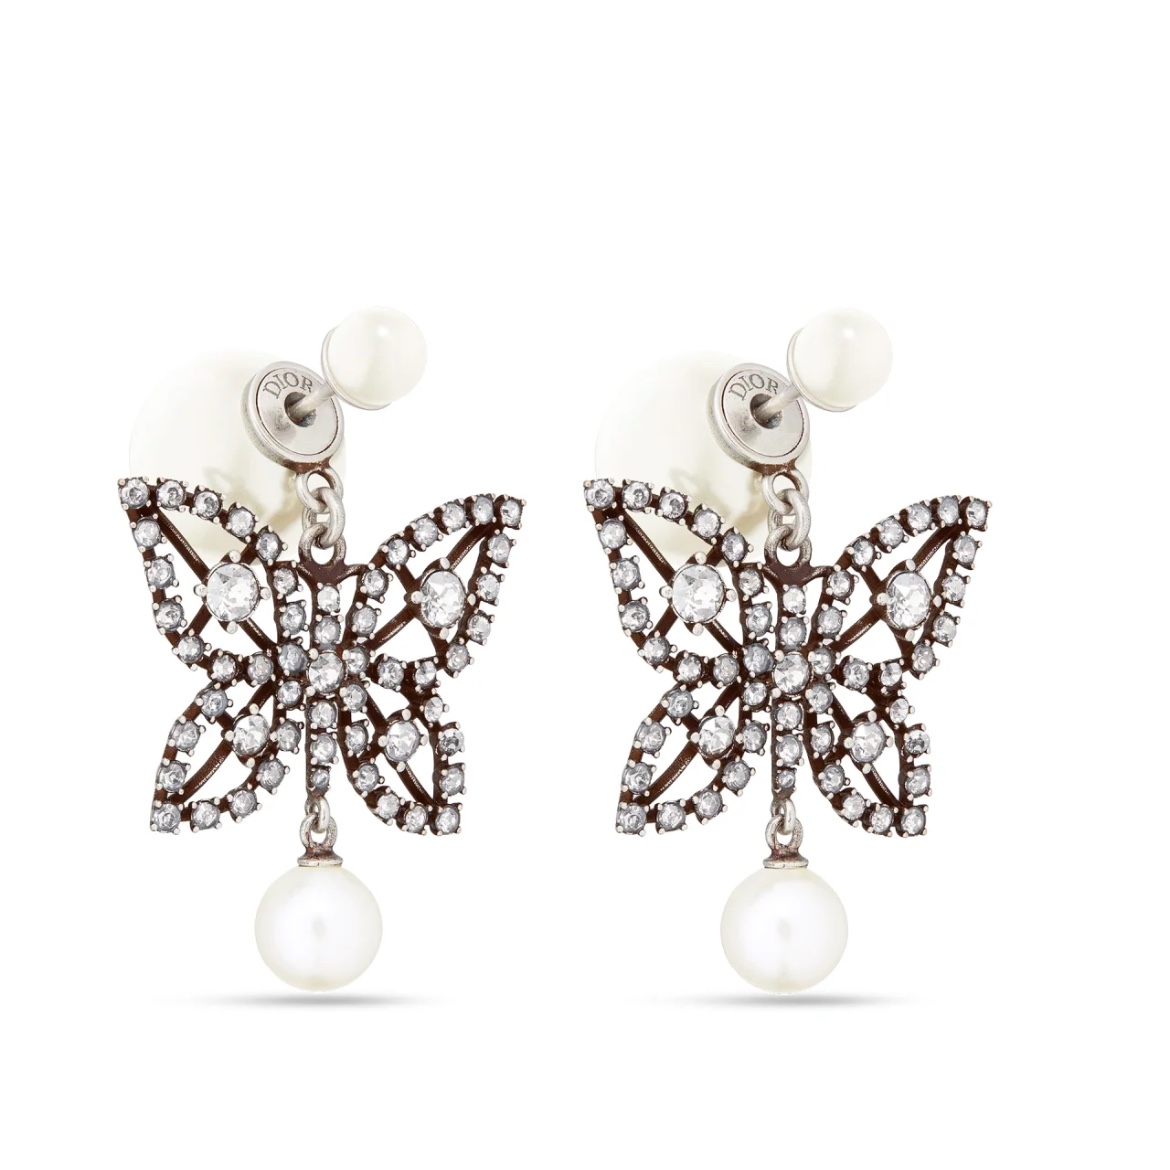 A1501 Dior Tribales butterfly earrings